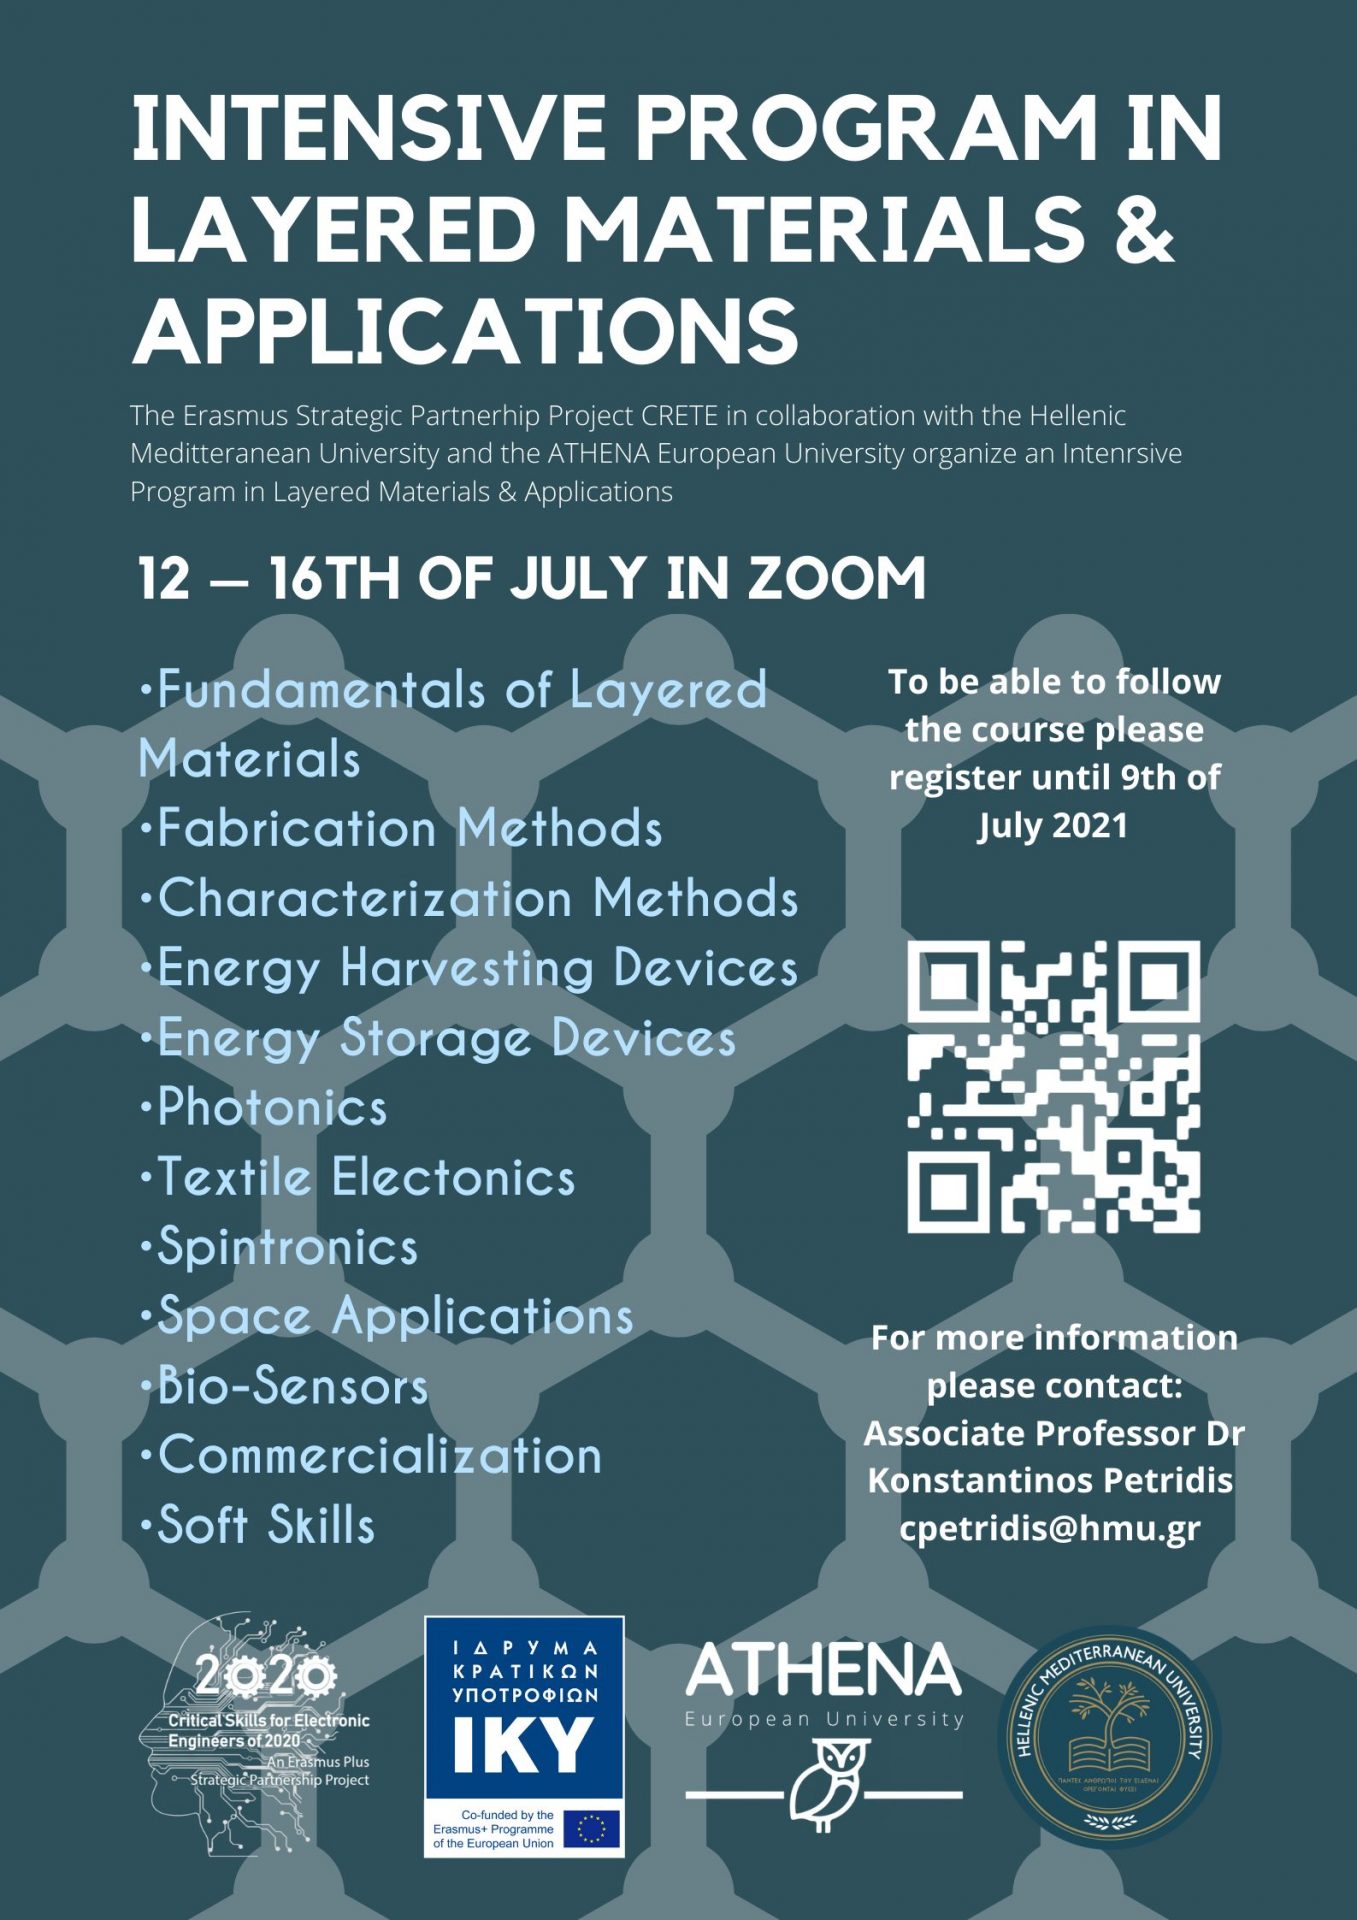 Intensive Program in Layered Materials & Applications